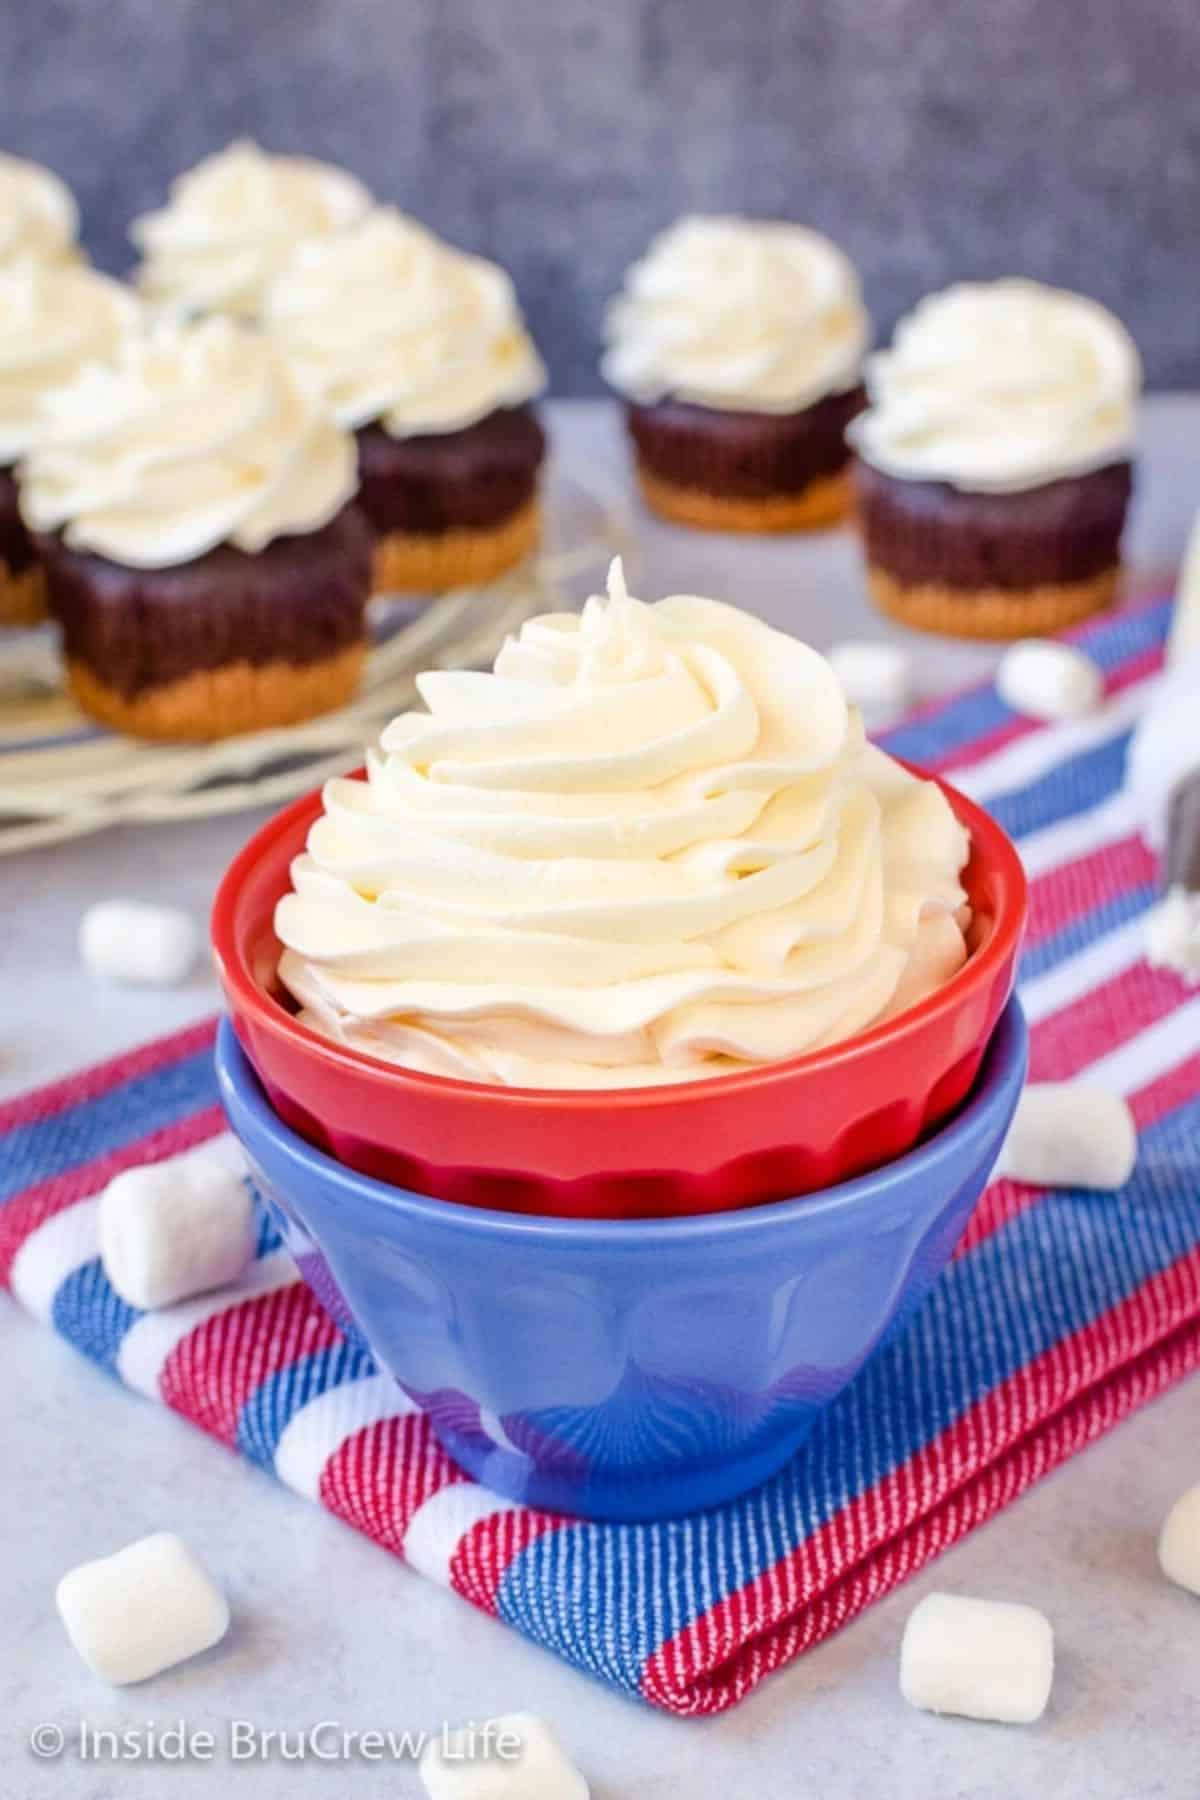 Fluffy, Marshmallow Buttercream Frosting in a small red bowl.